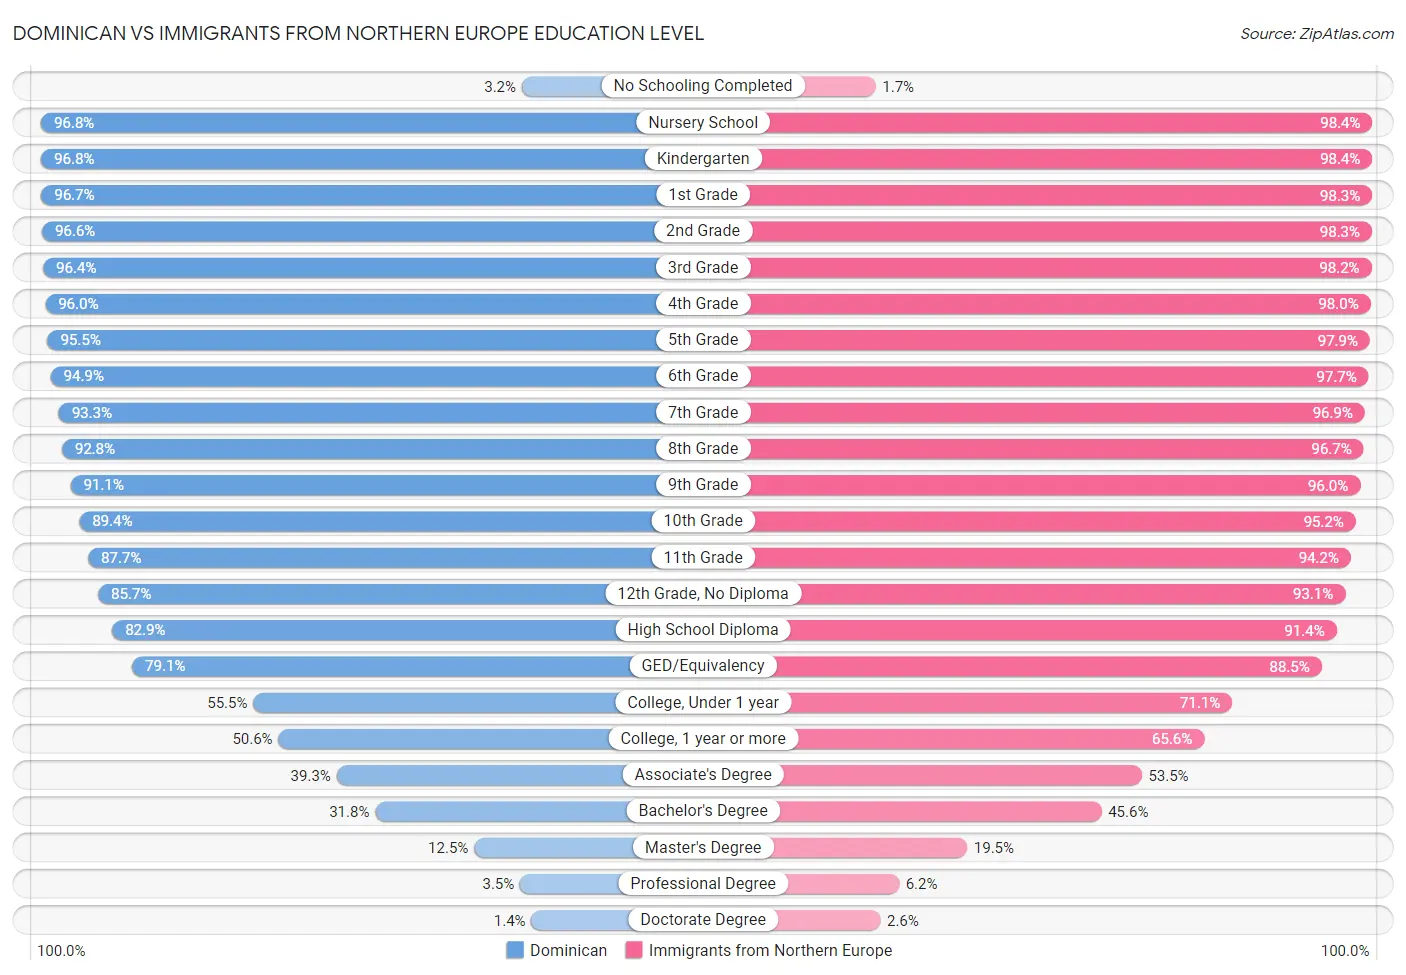 Dominican vs Immigrants from Northern Europe Education Level